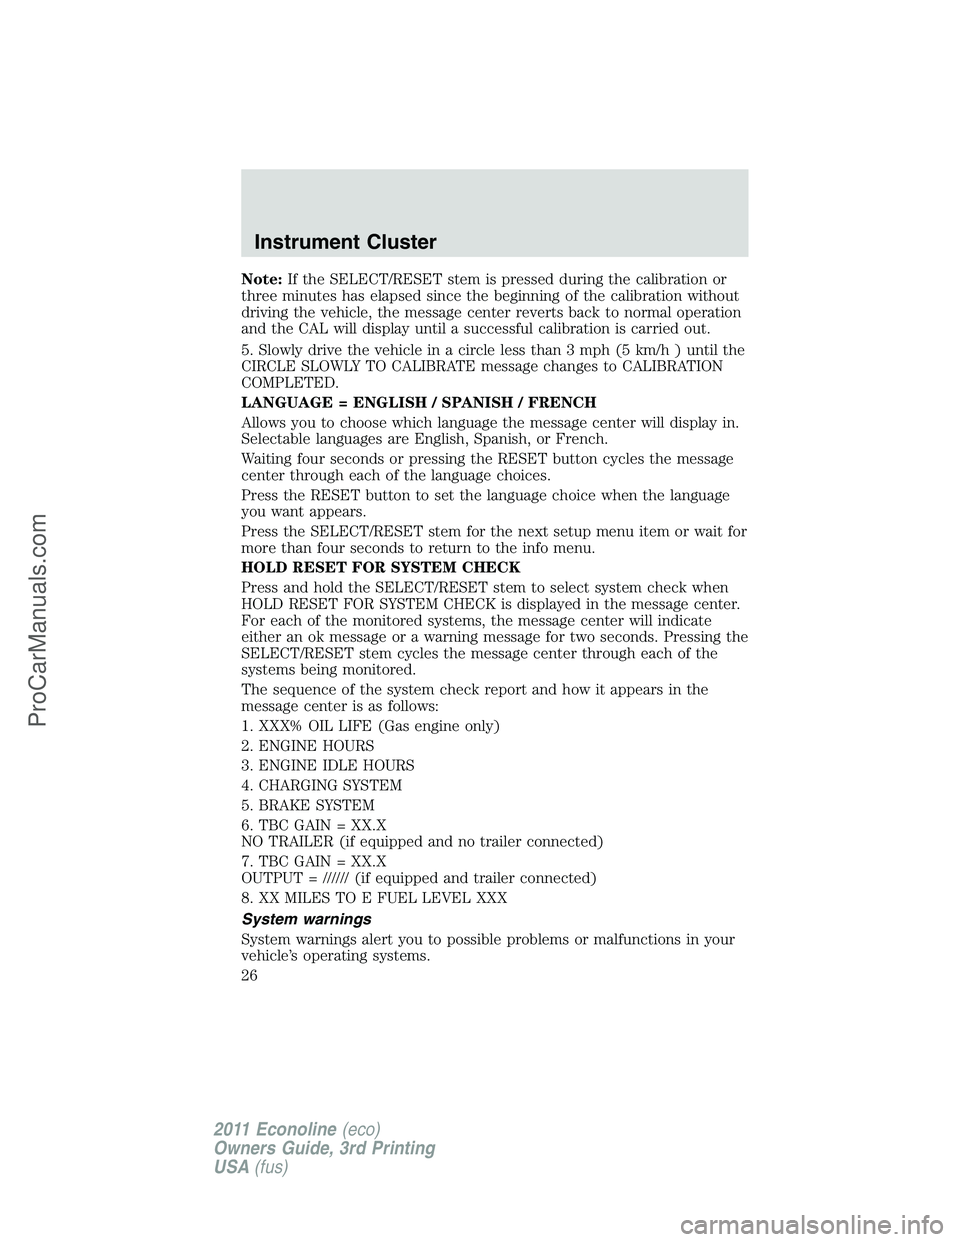 FORD E-450 2011  Owners Manual Note:If the SELECT/RESET stem is pressed during the calibration or
three minutes has elapsed since the beginning of the calibration without
driving the vehicle, the message center reverts back to norm